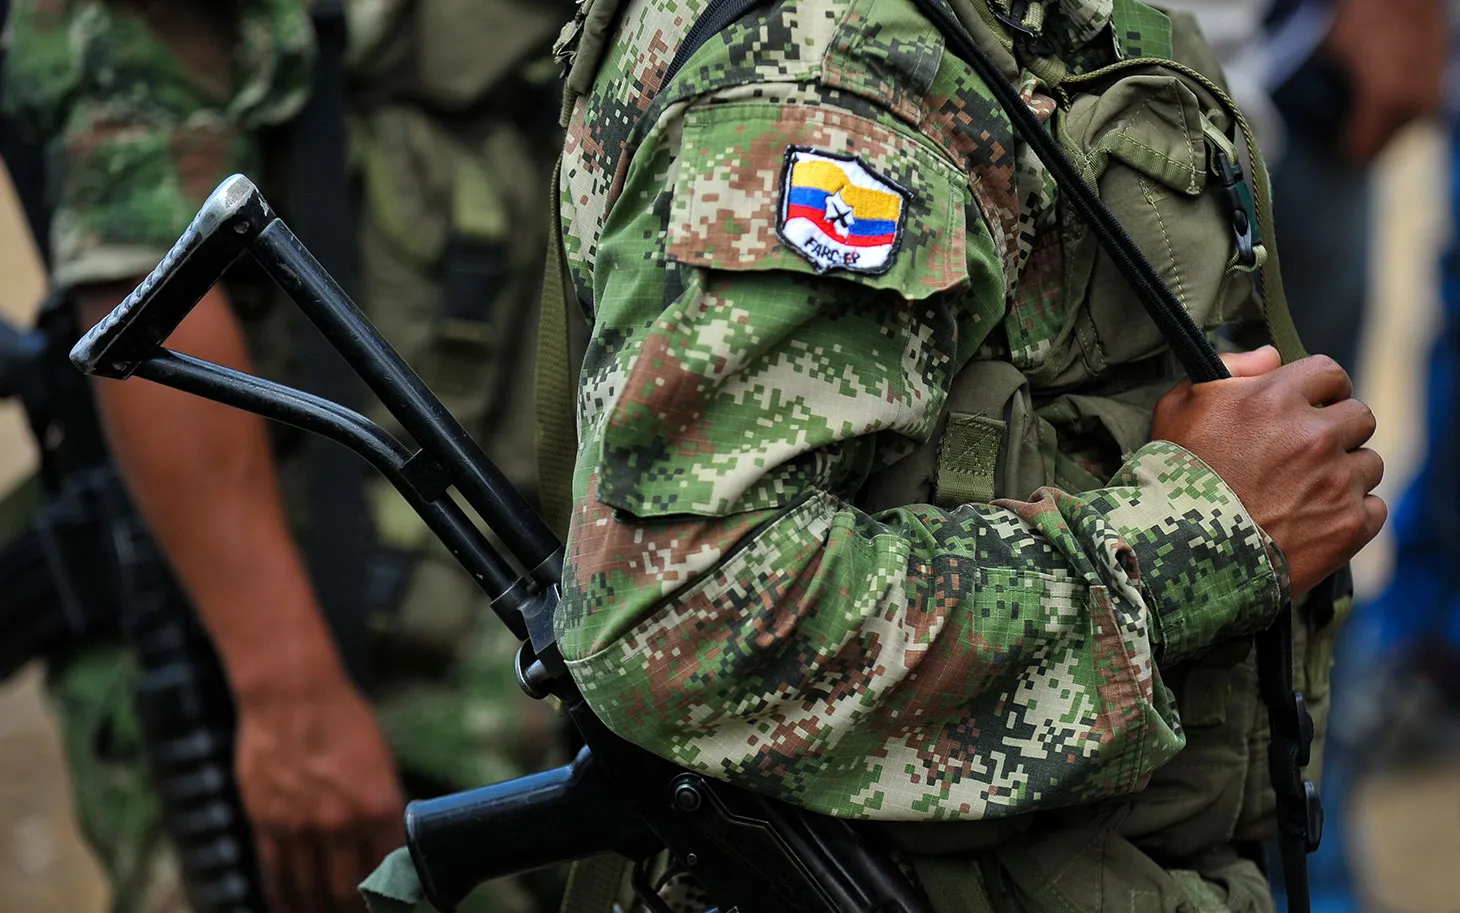 ‘I grew up with the guerrilla, but I don’t want to die there’: The story of a former child combatant in Colombia’s armed conflict